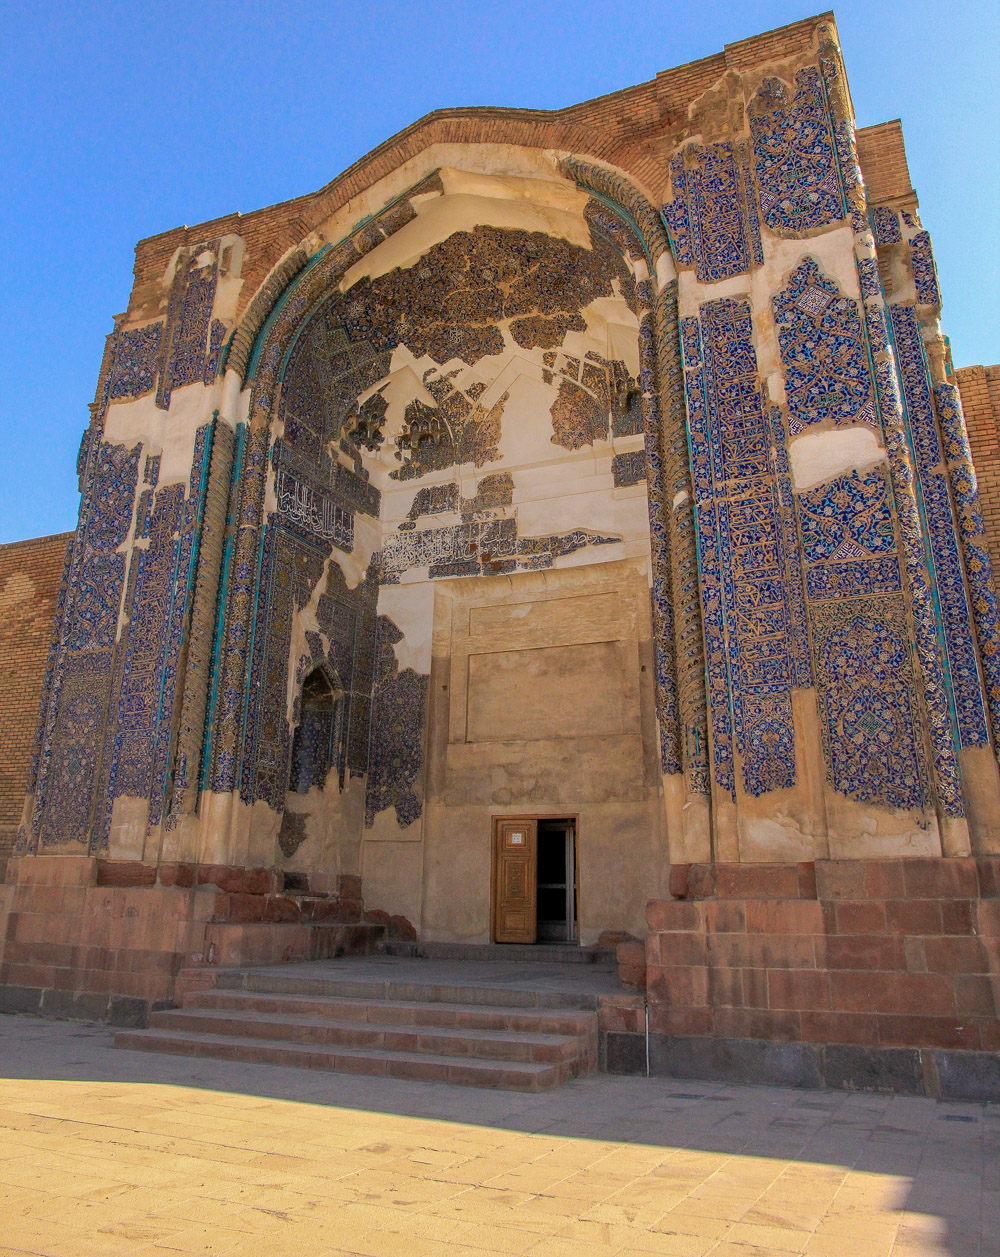 The blue Mosque in Tabriz